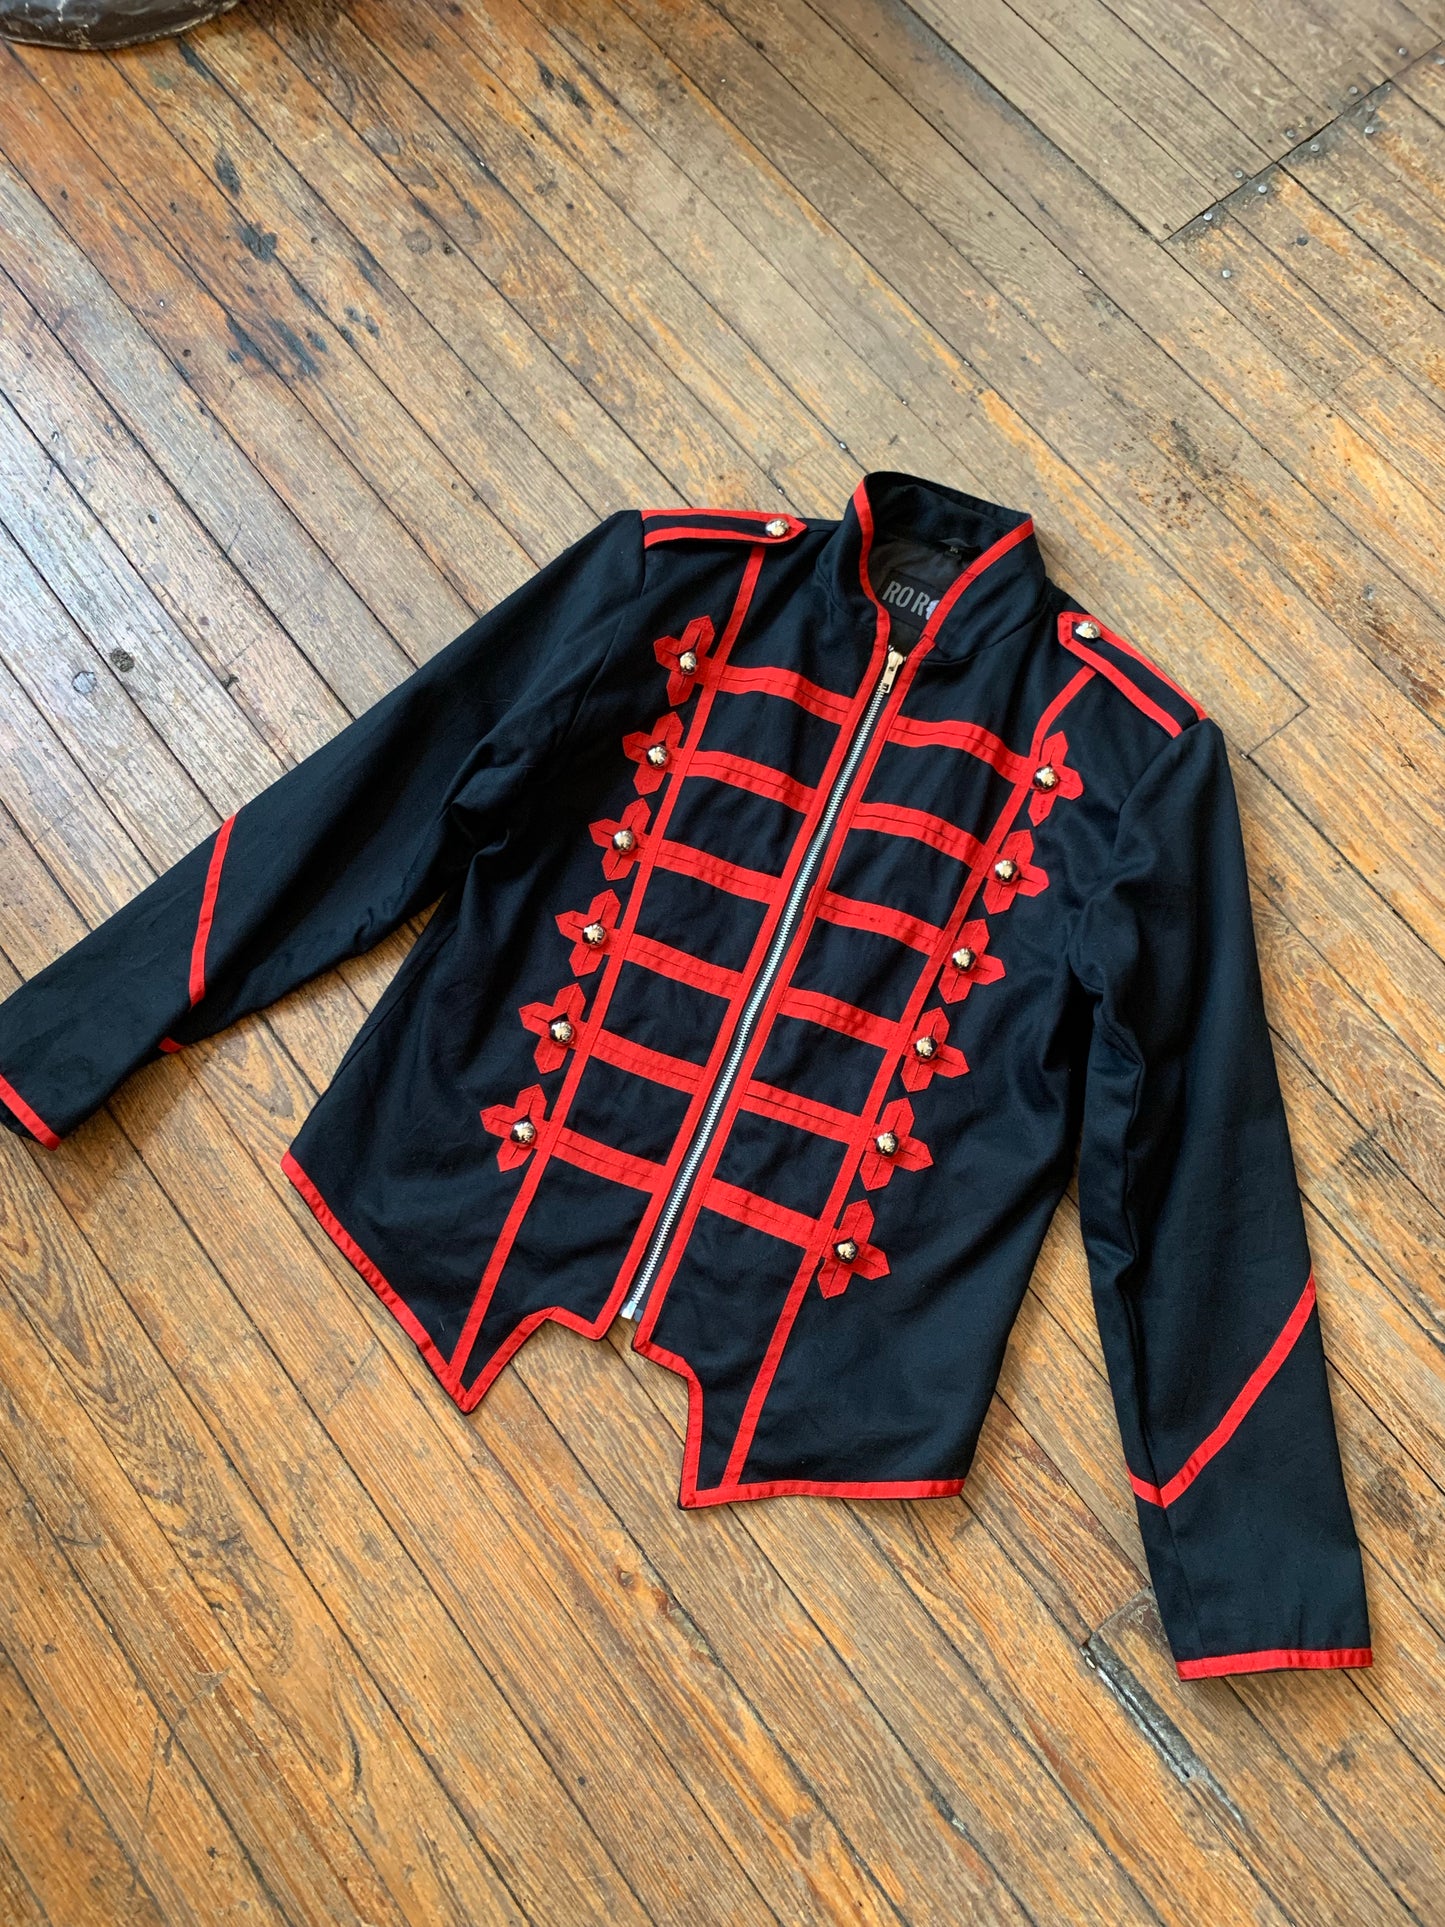 Welcome to the Black Parade Black and Red Military Jacket